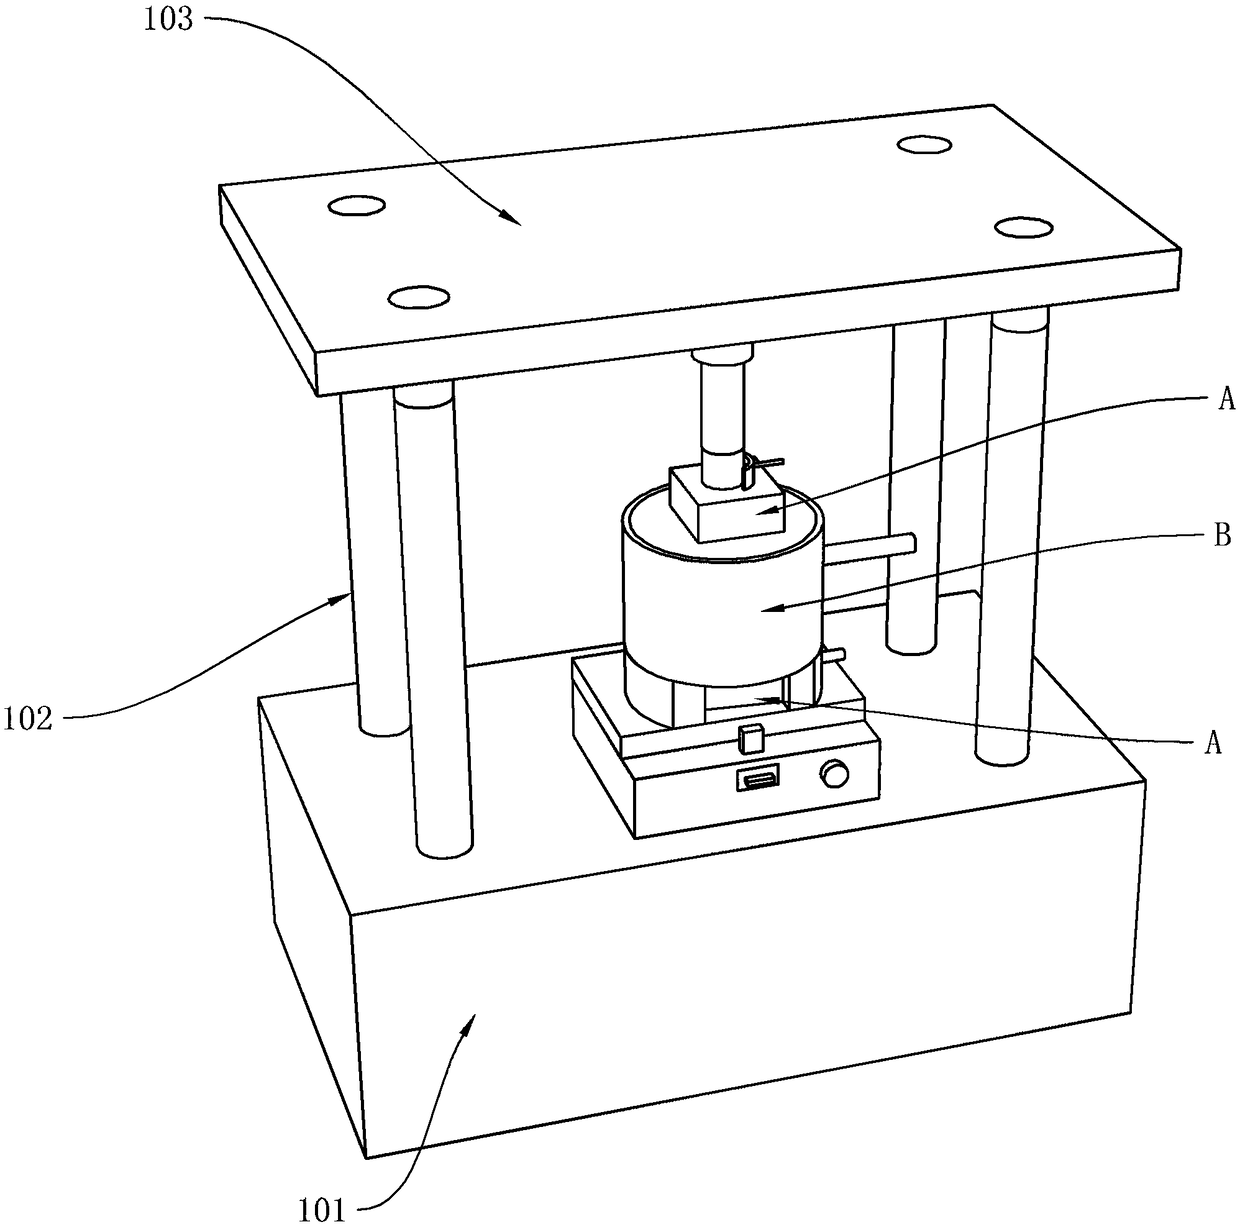 A rock tensile strength testing device capable of adding confining pressure